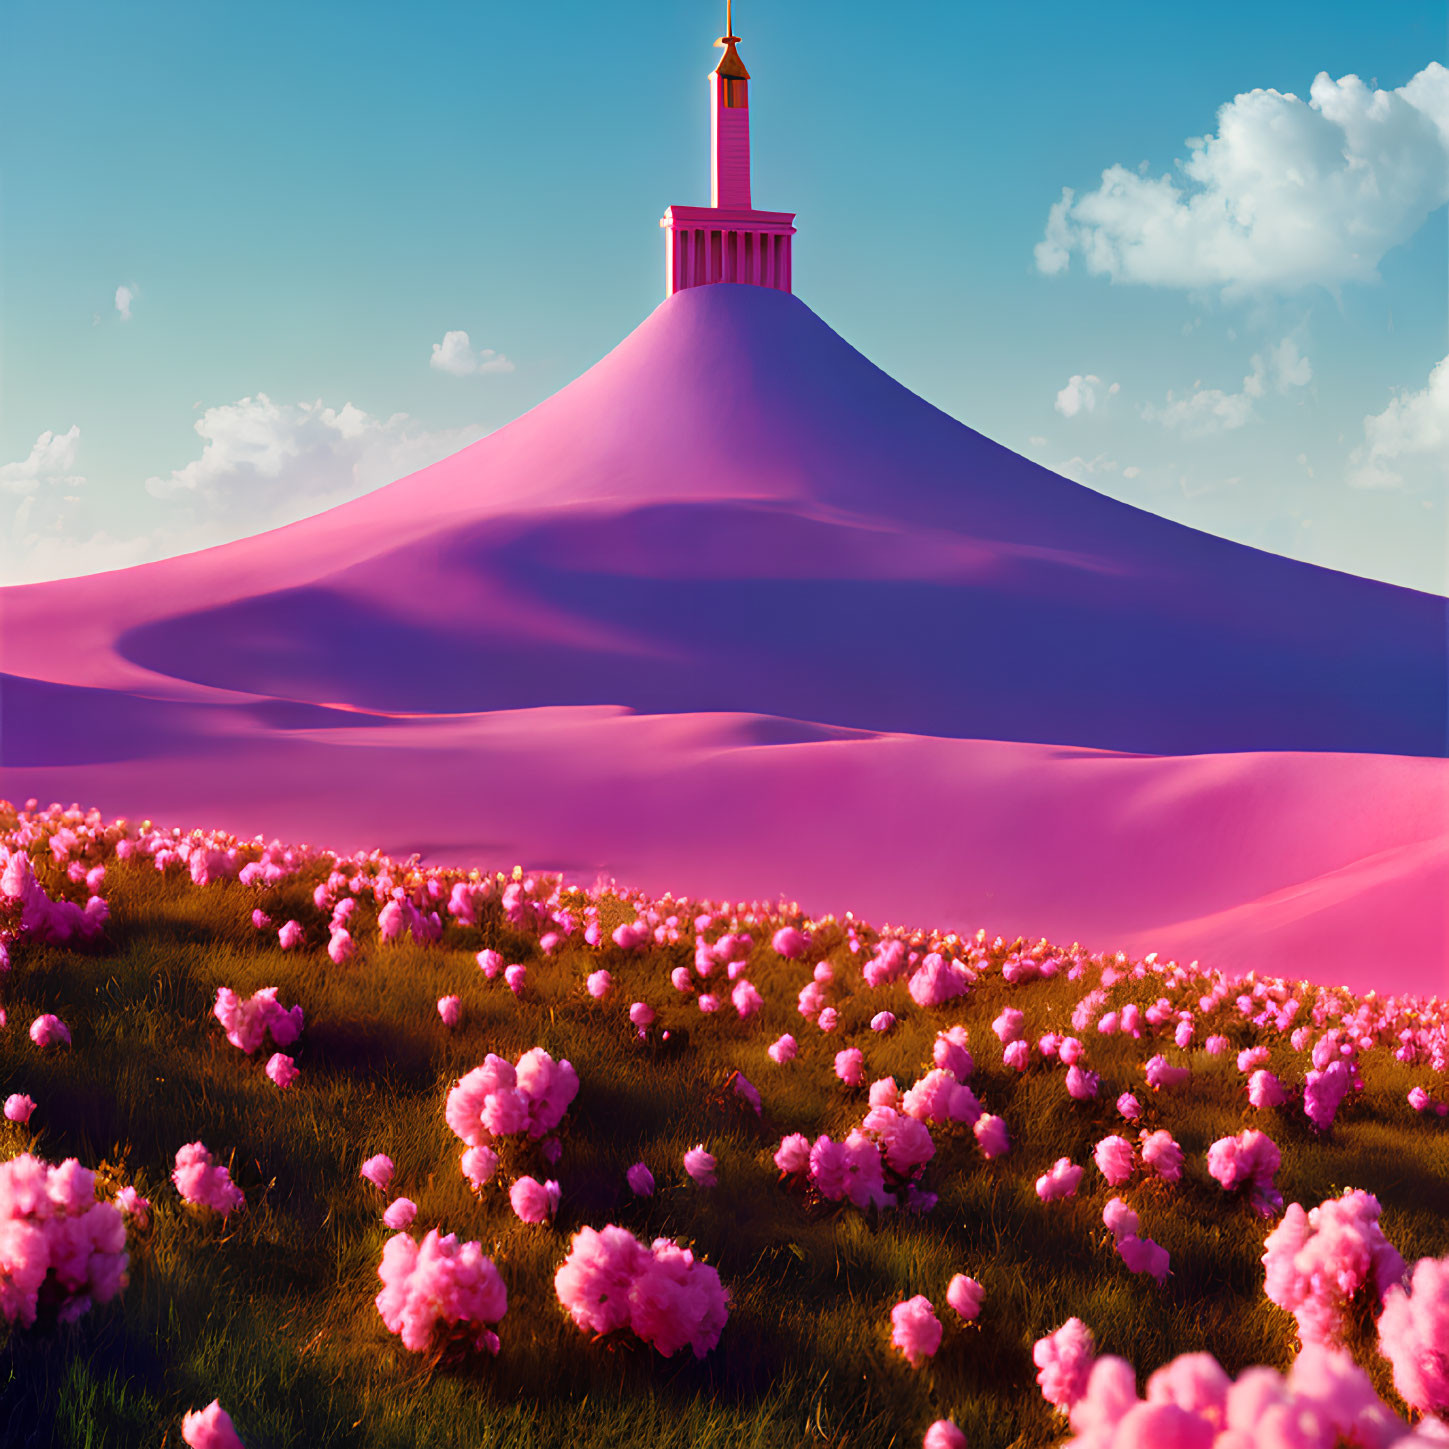 Surreal pink sand desert with tower and pink flowers on dune